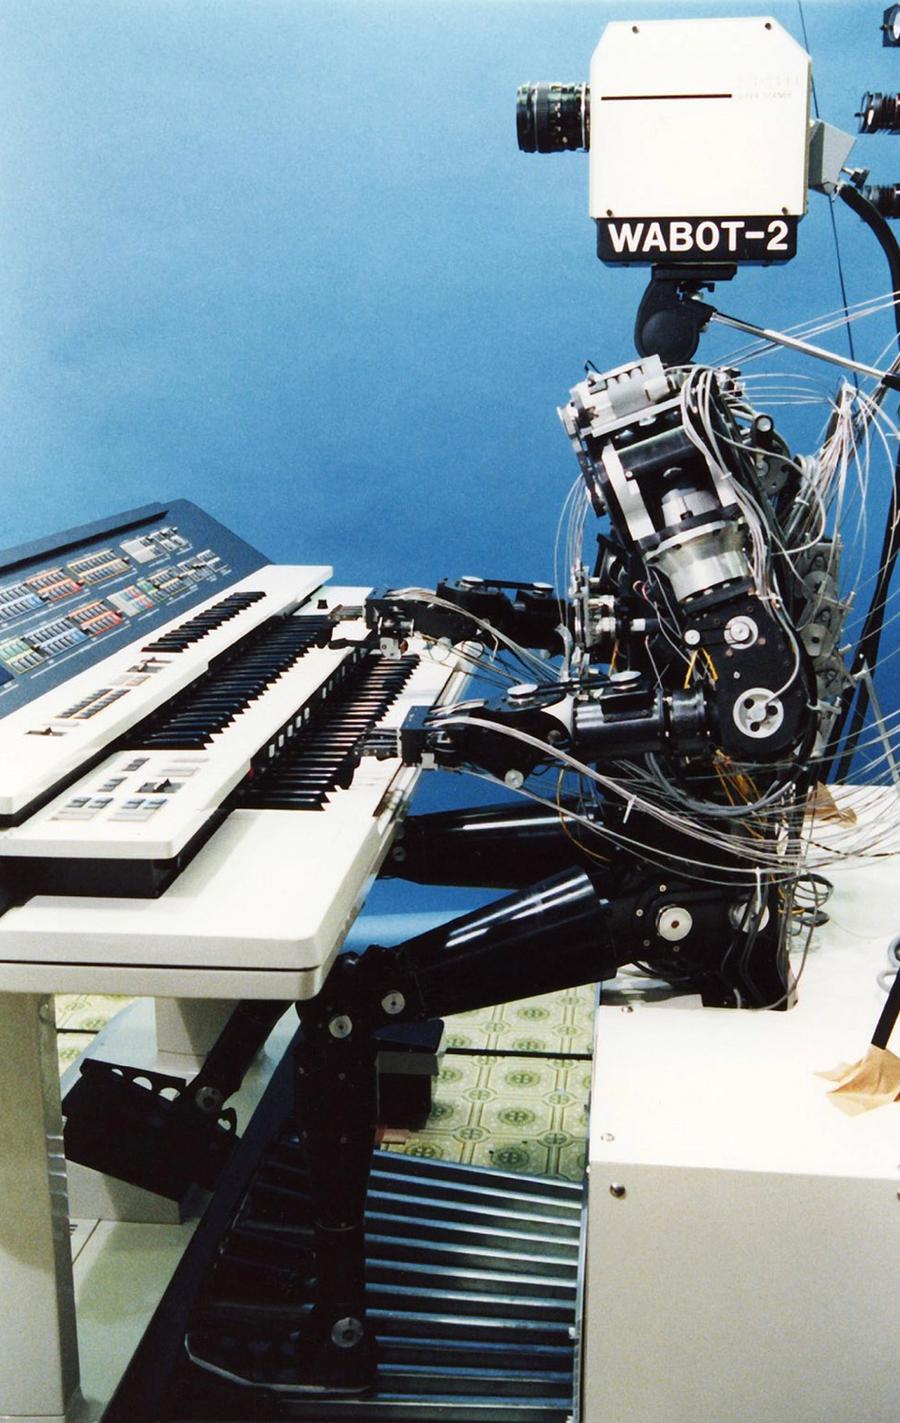 A historical robot with a complex humanoid body and a 1980's era video camera for a head sits and plays the keyboards.